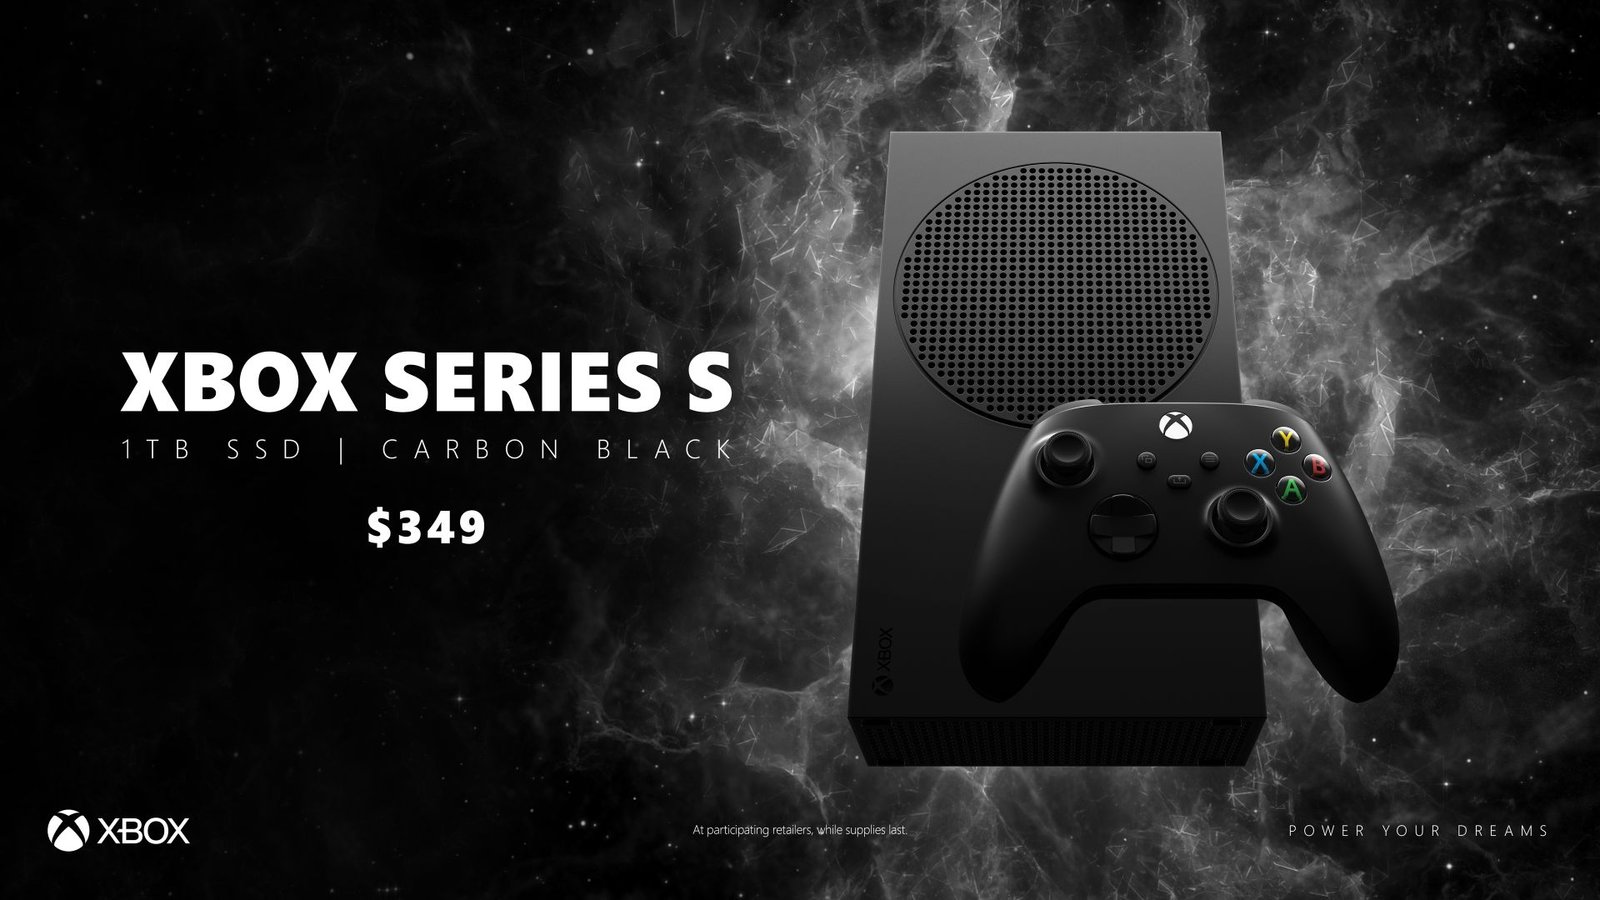 Video For Back in Black, Xbox Series S is Now Available with a 1TB SSD